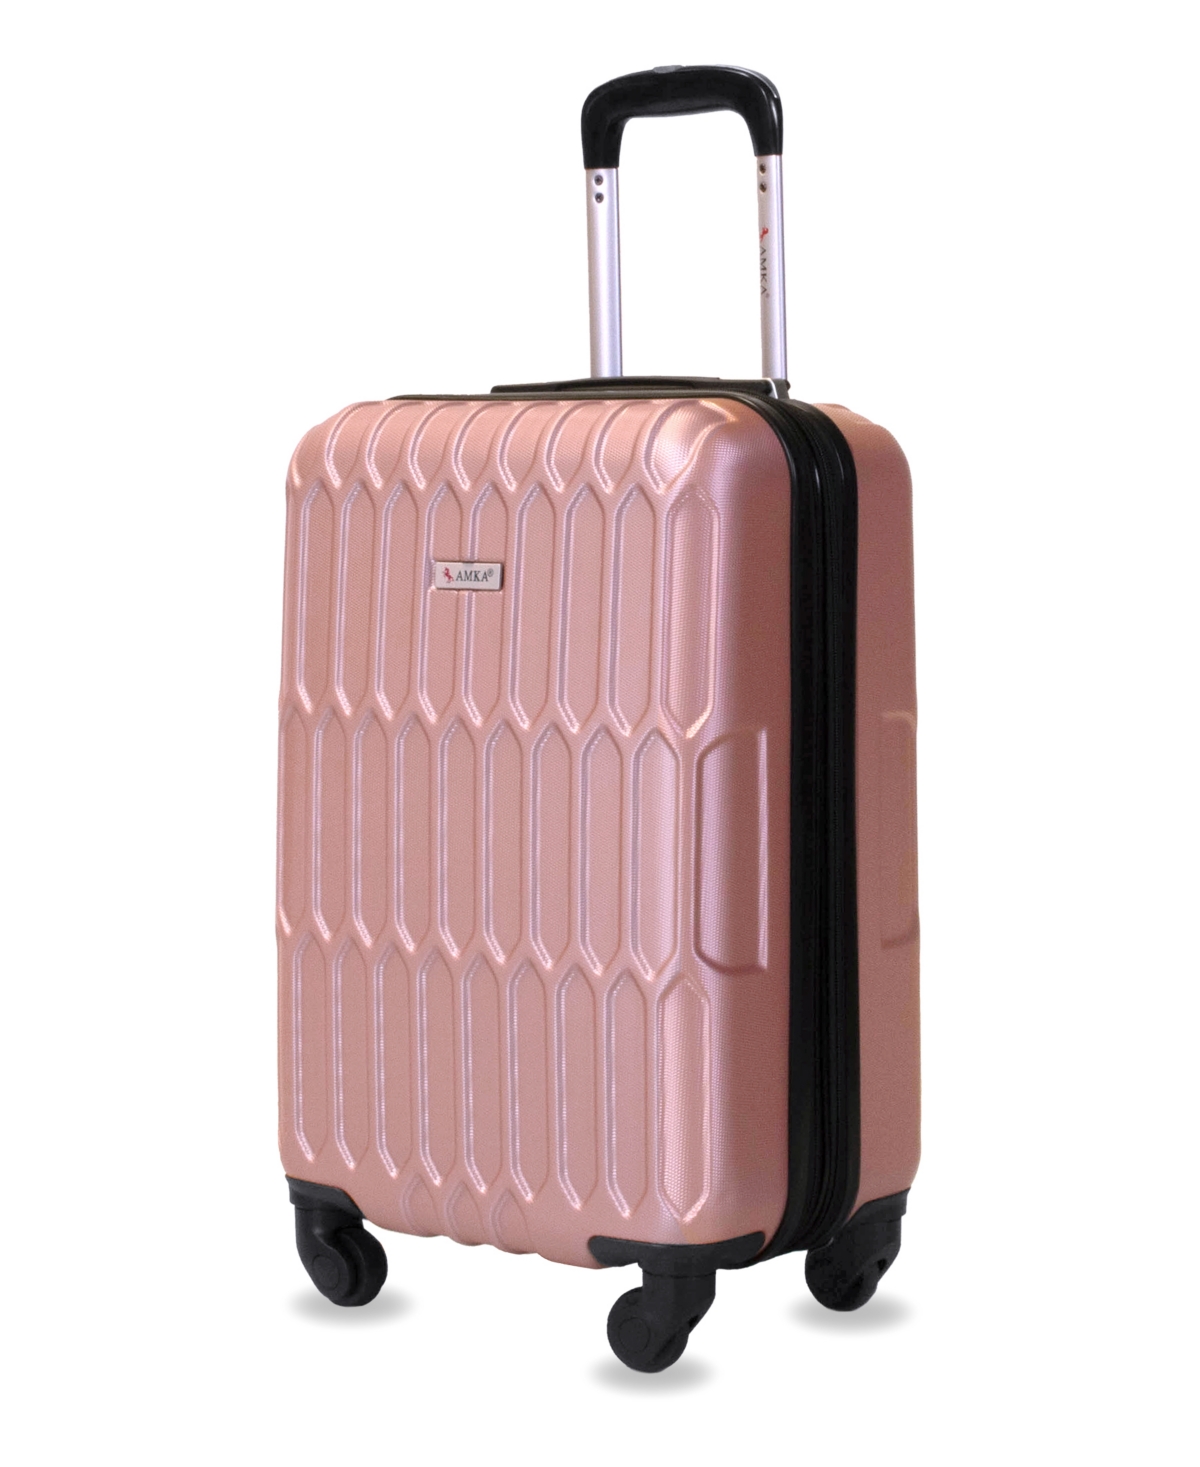 Amka Honeycomb 22" Carry-on Expandable Spinner Suitcase In Rose Gold